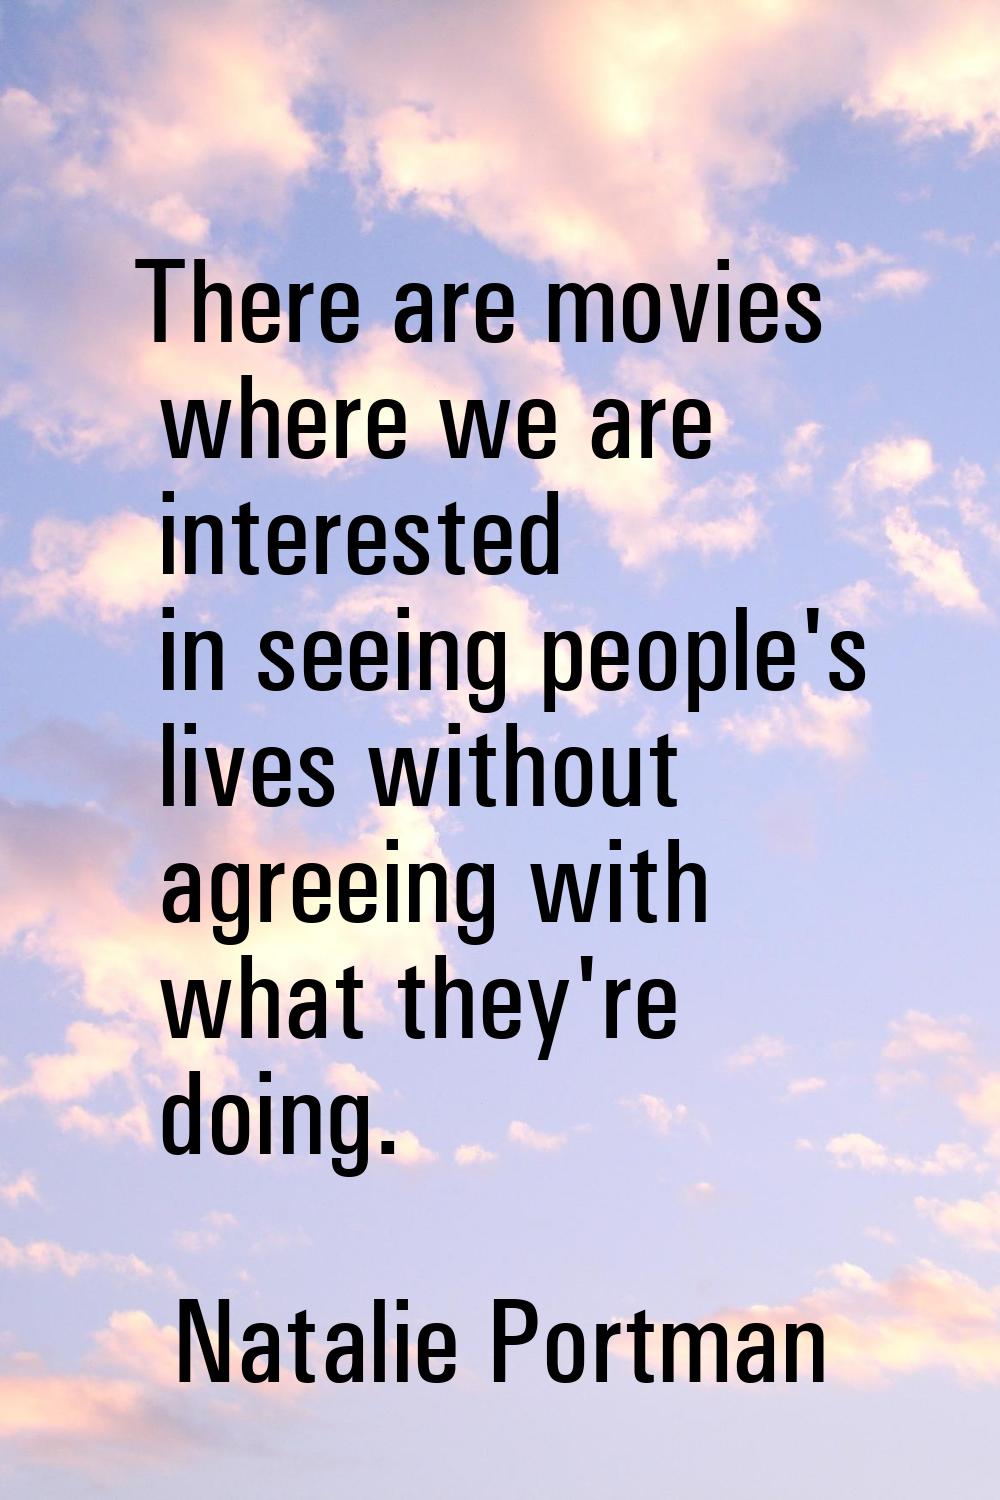 There are movies where we are interested in seeing people's lives without agreeing with what they'r